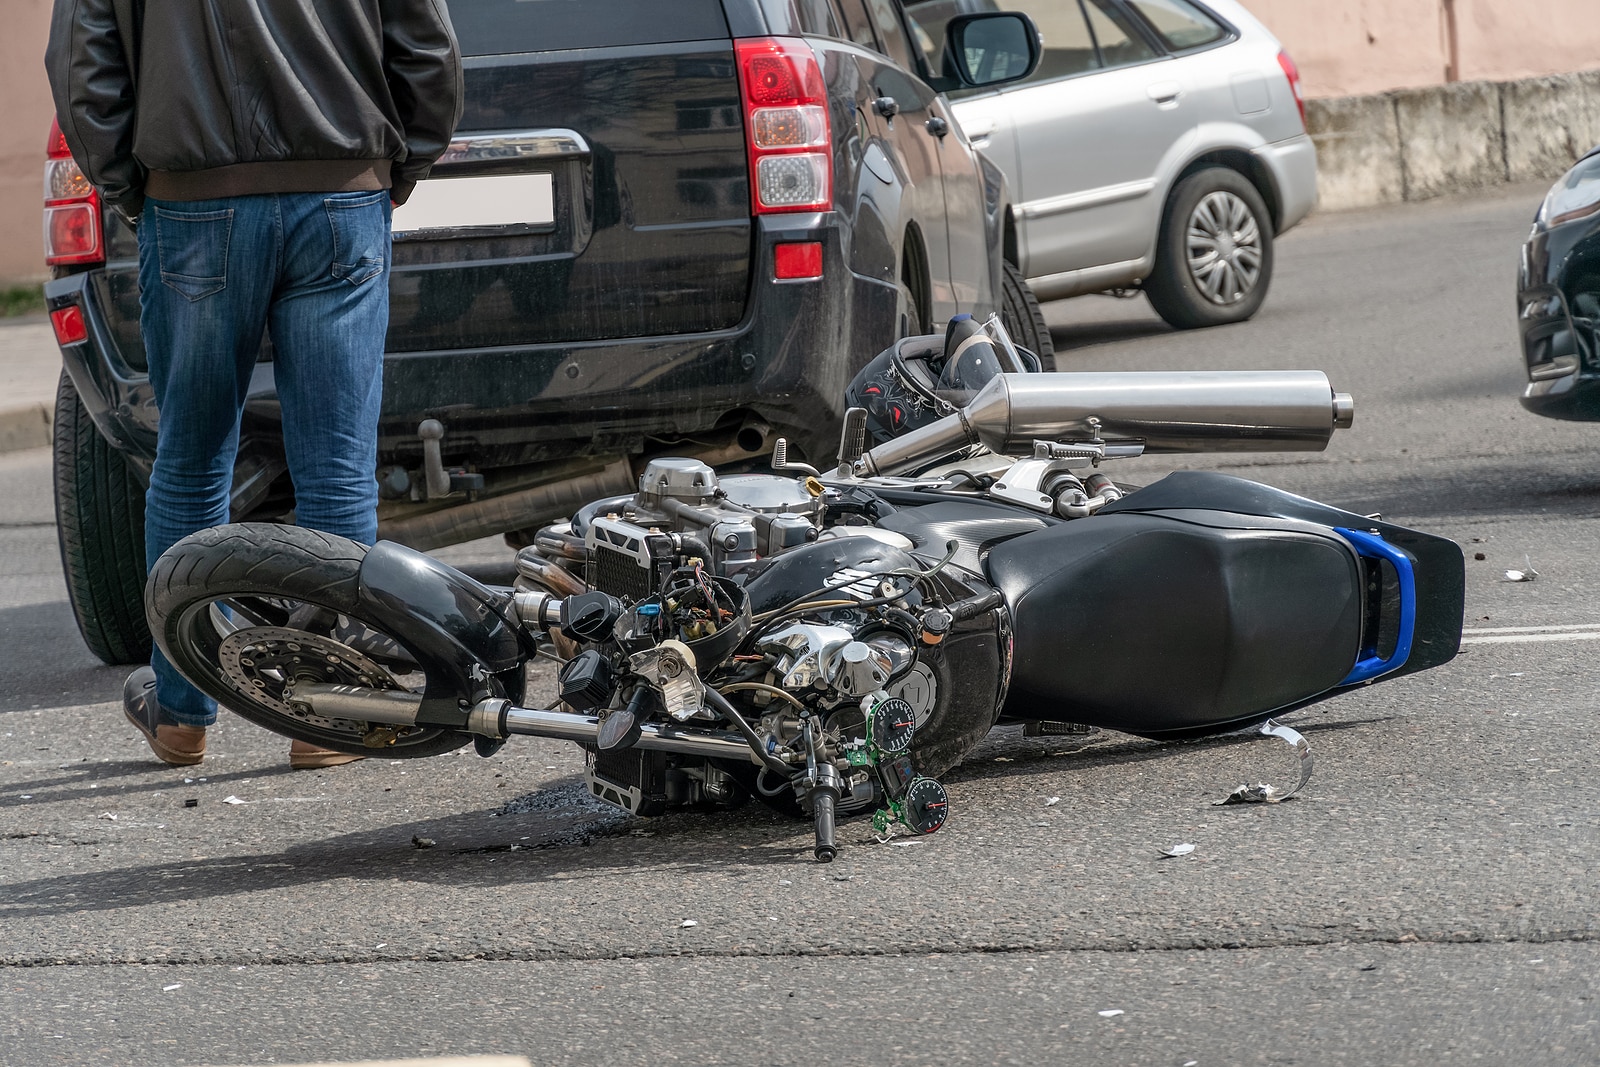 What Should You Do Immediately After a Motorcycle Accident to Protect Your Legal Rights?